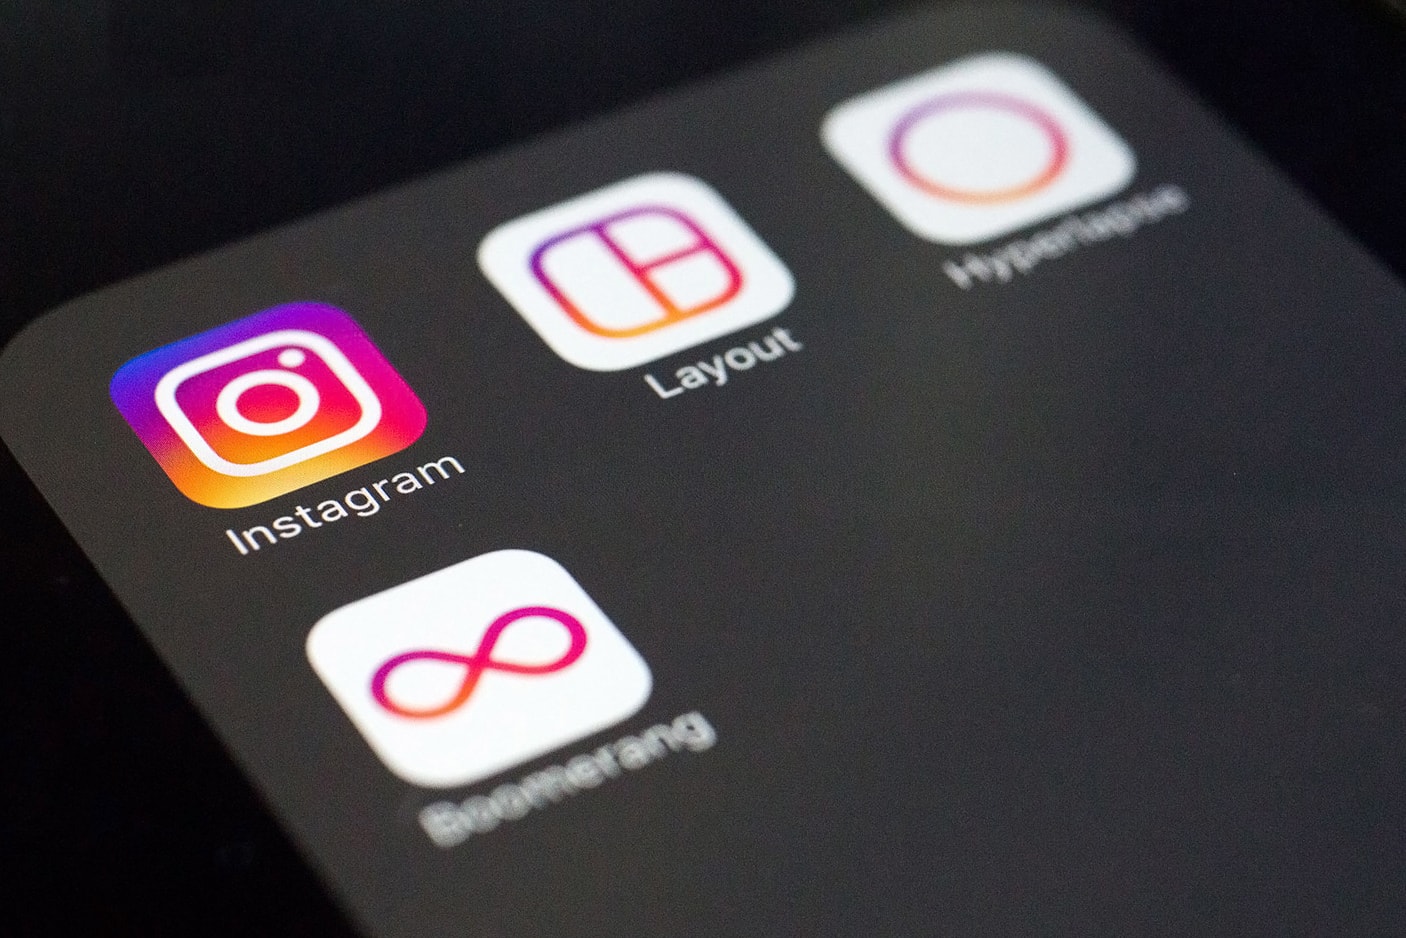 Instagram 600 Million Active Monthly Users IG